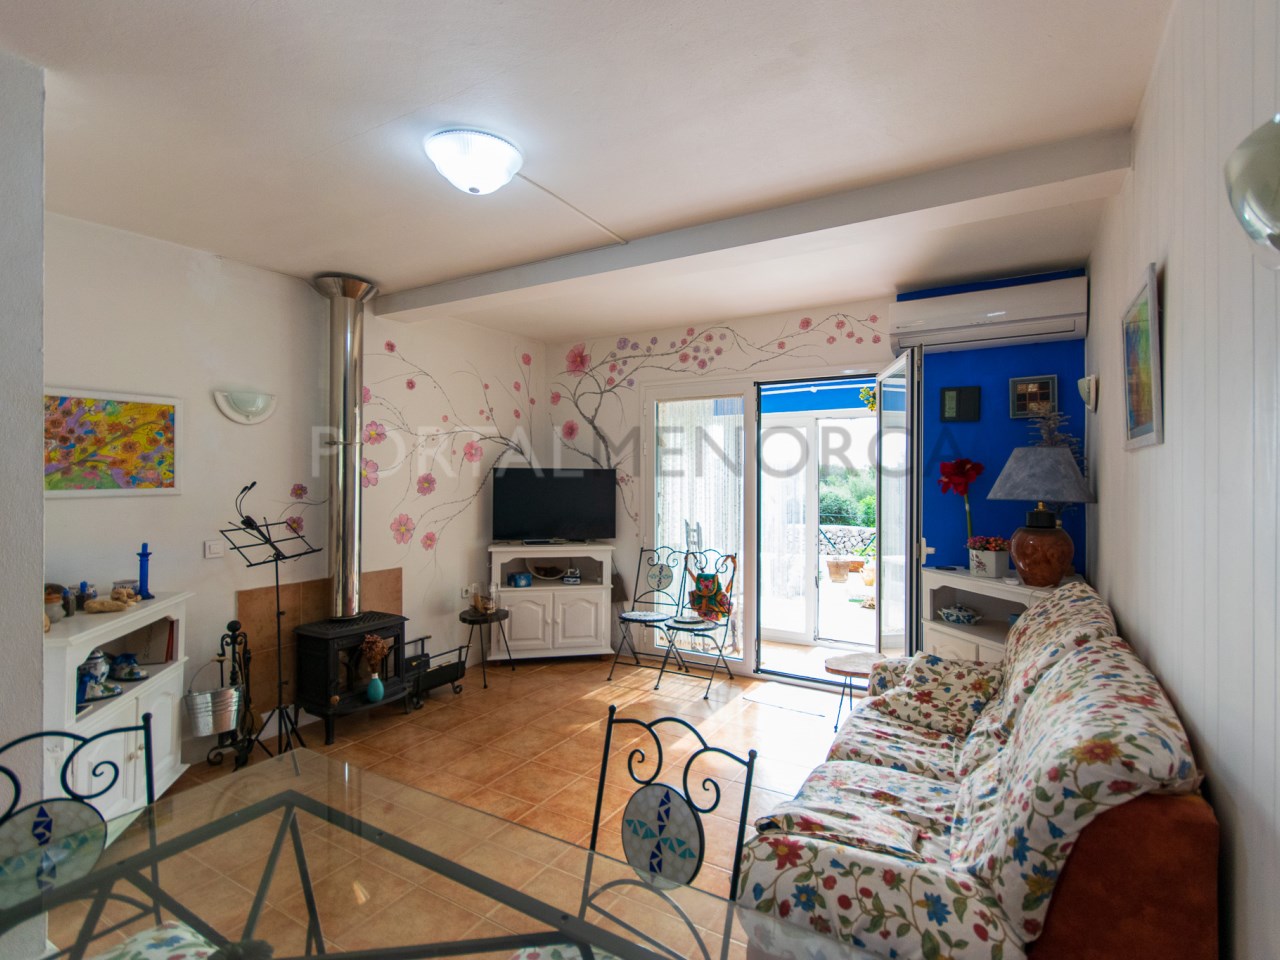 Living-dining room of two-bedroom townhouse for sale in Cales Coves